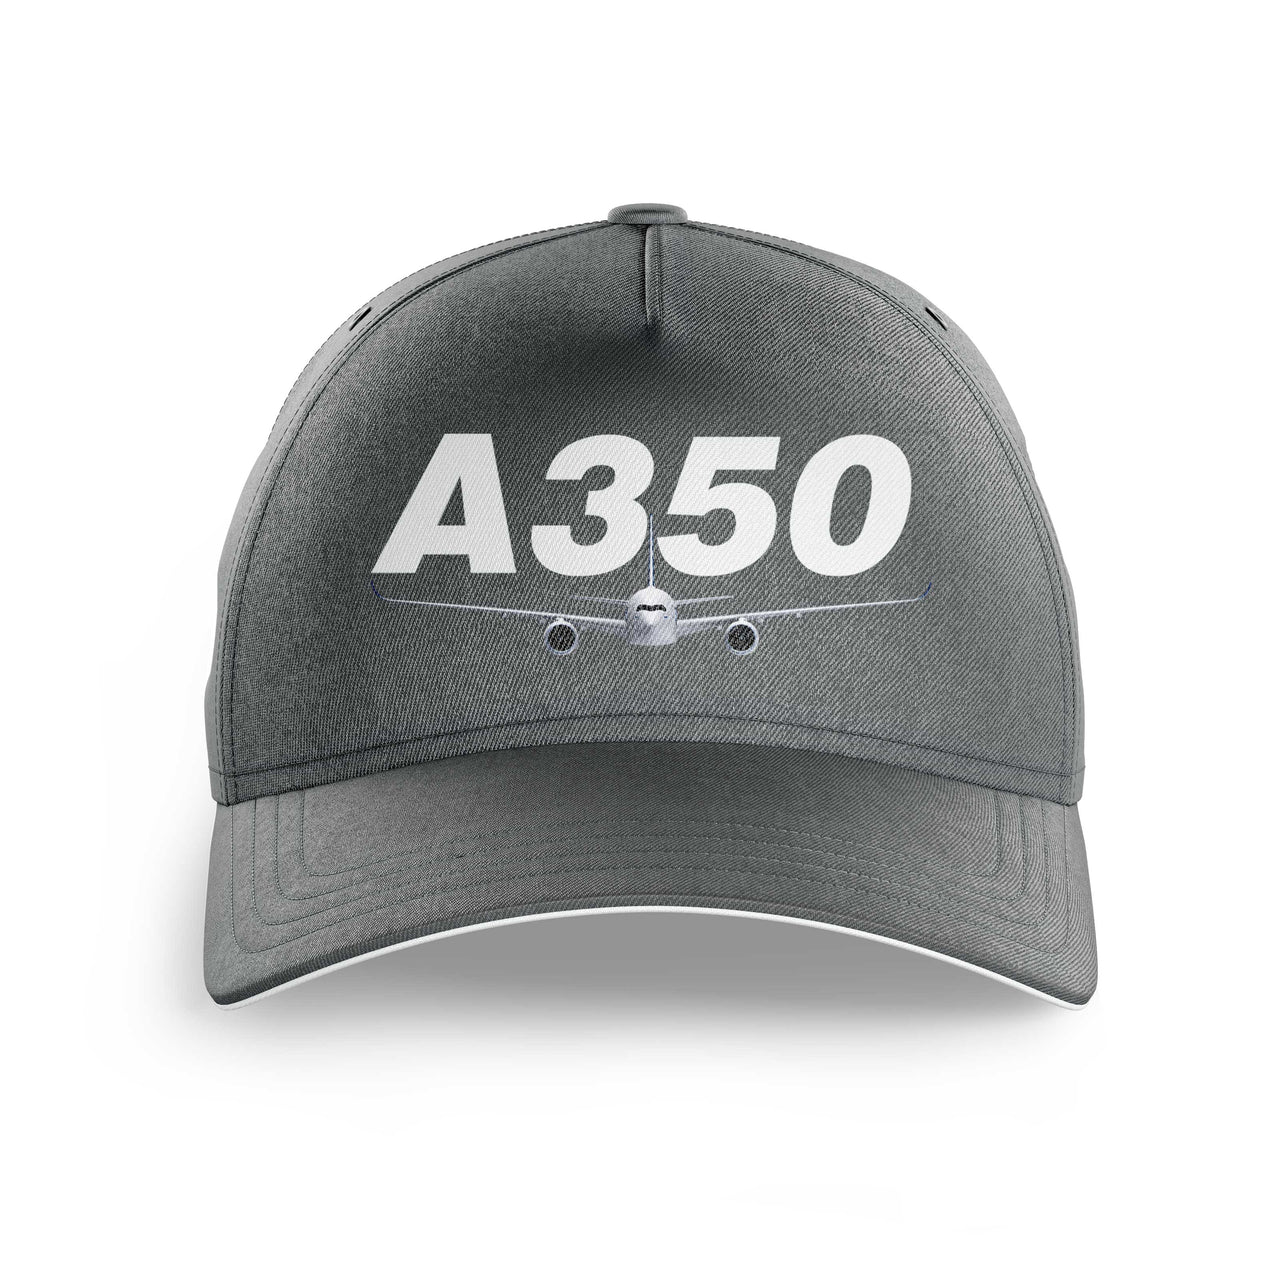 Super Airbus A350 Printed Hats